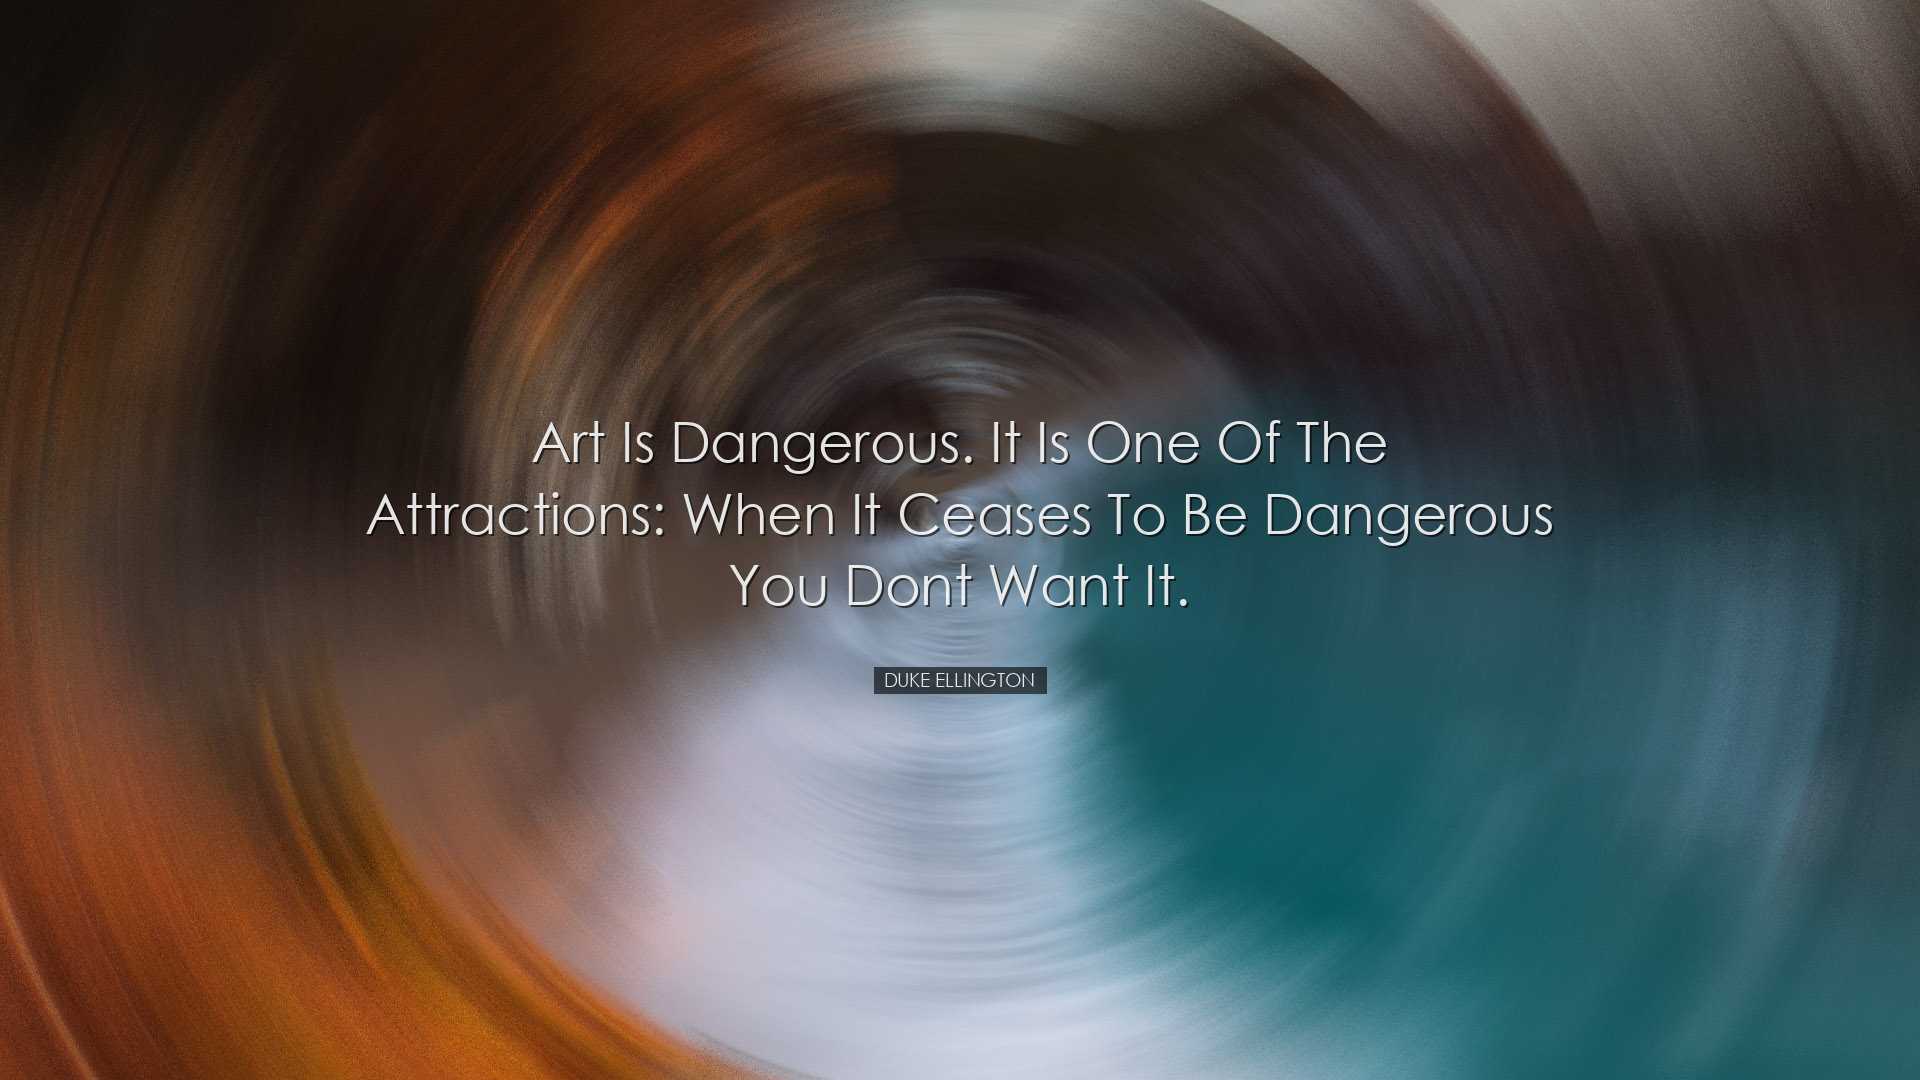 Art is dangerous. It is one of the attractions: when it ceases to